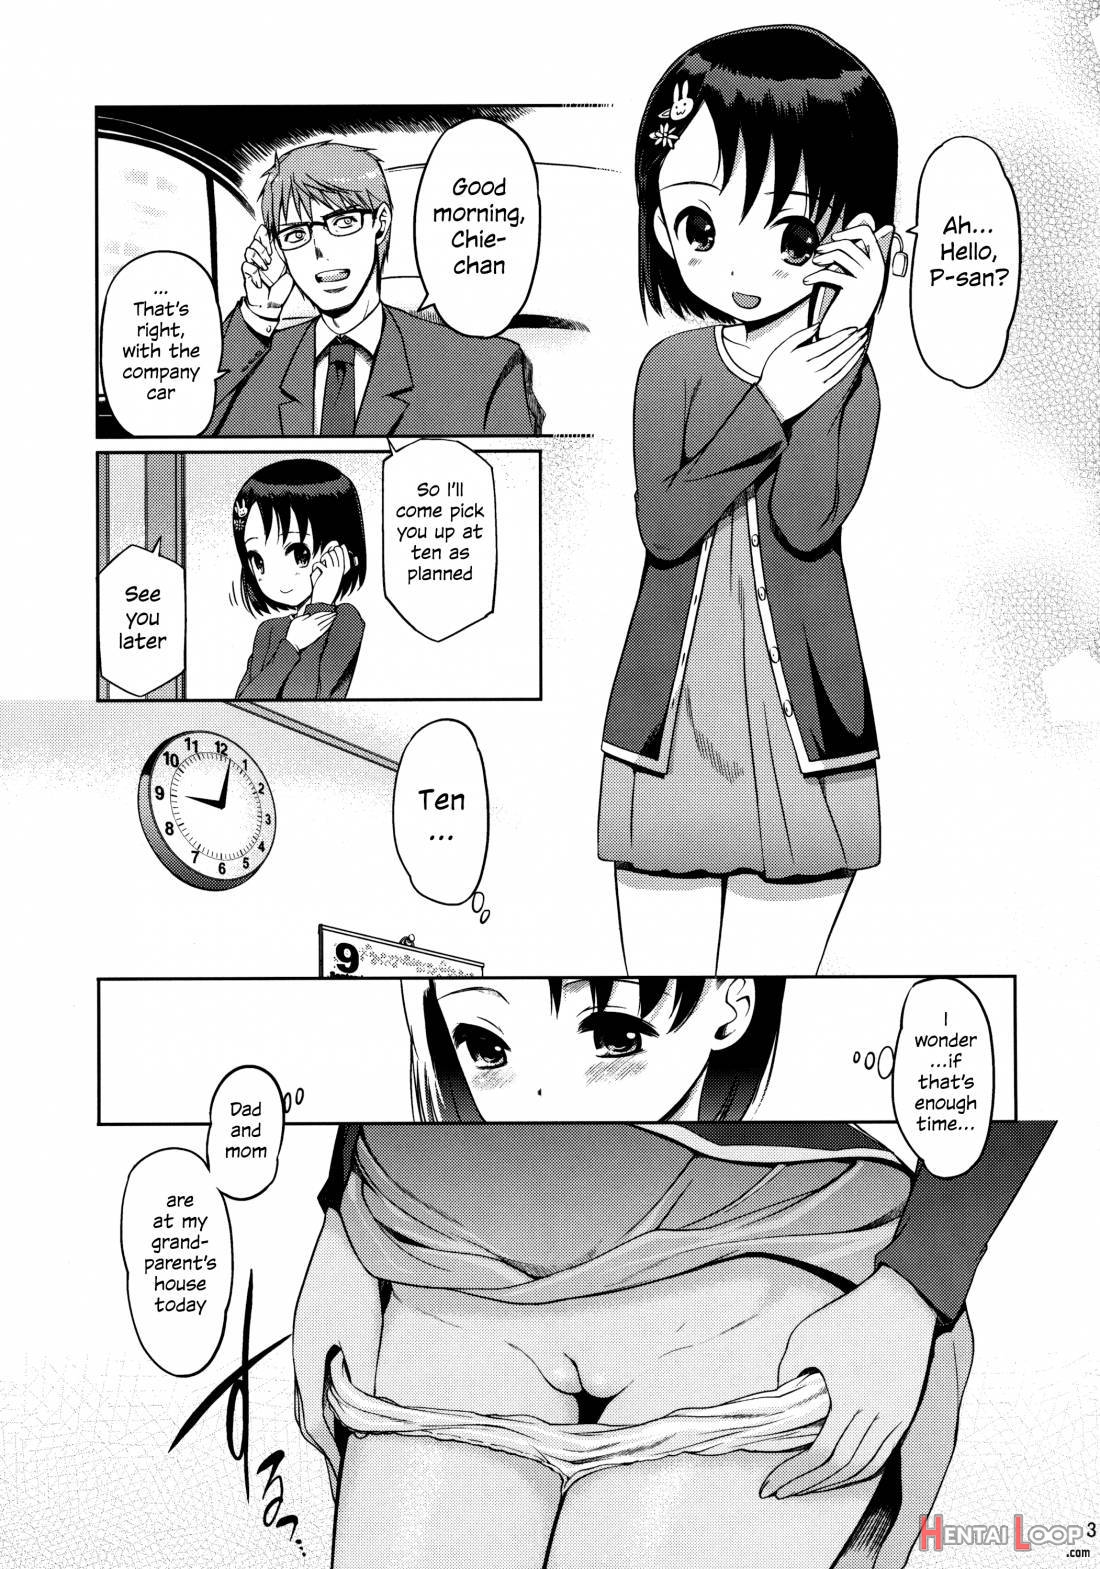 P-san To Issho! page 2